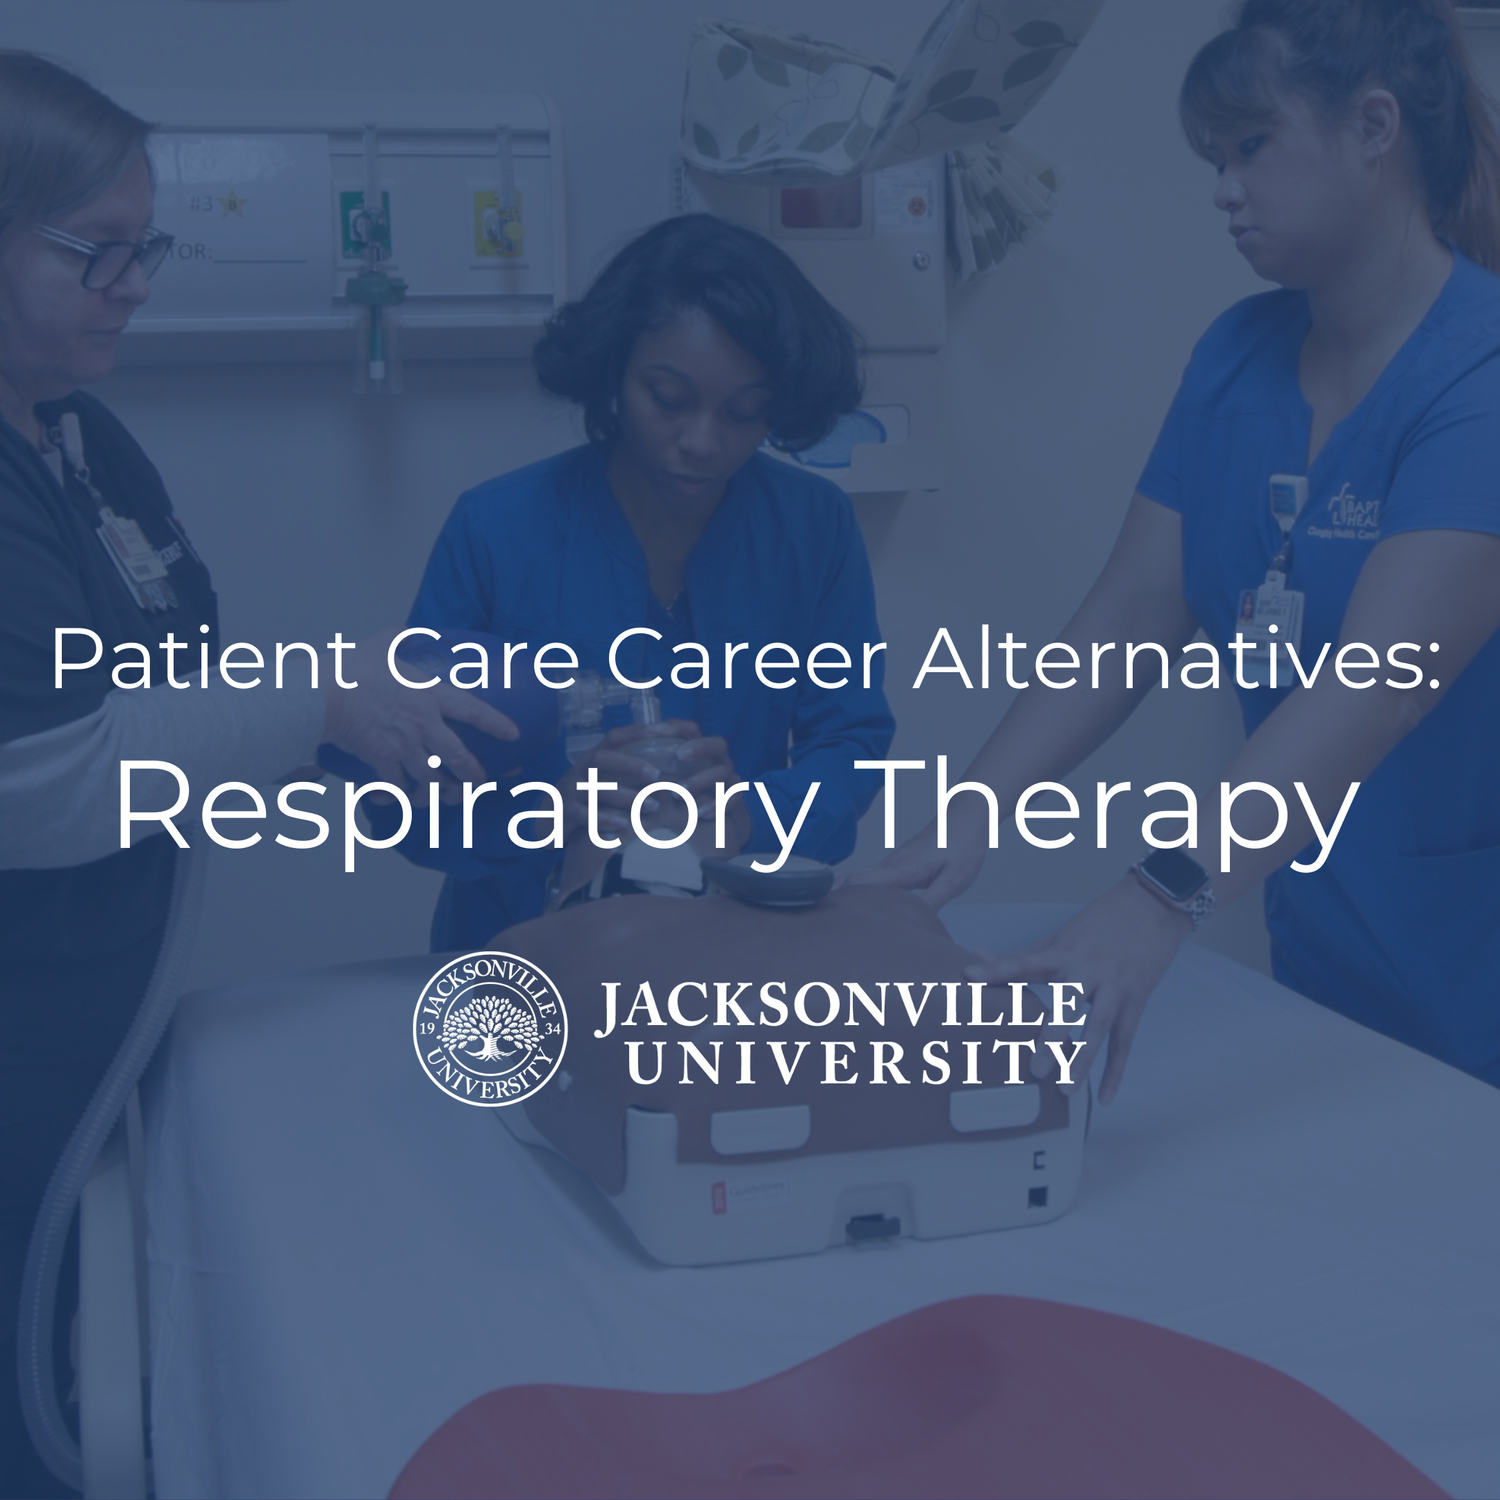 Patient Care Career Alternatives: Respiratory Therapy